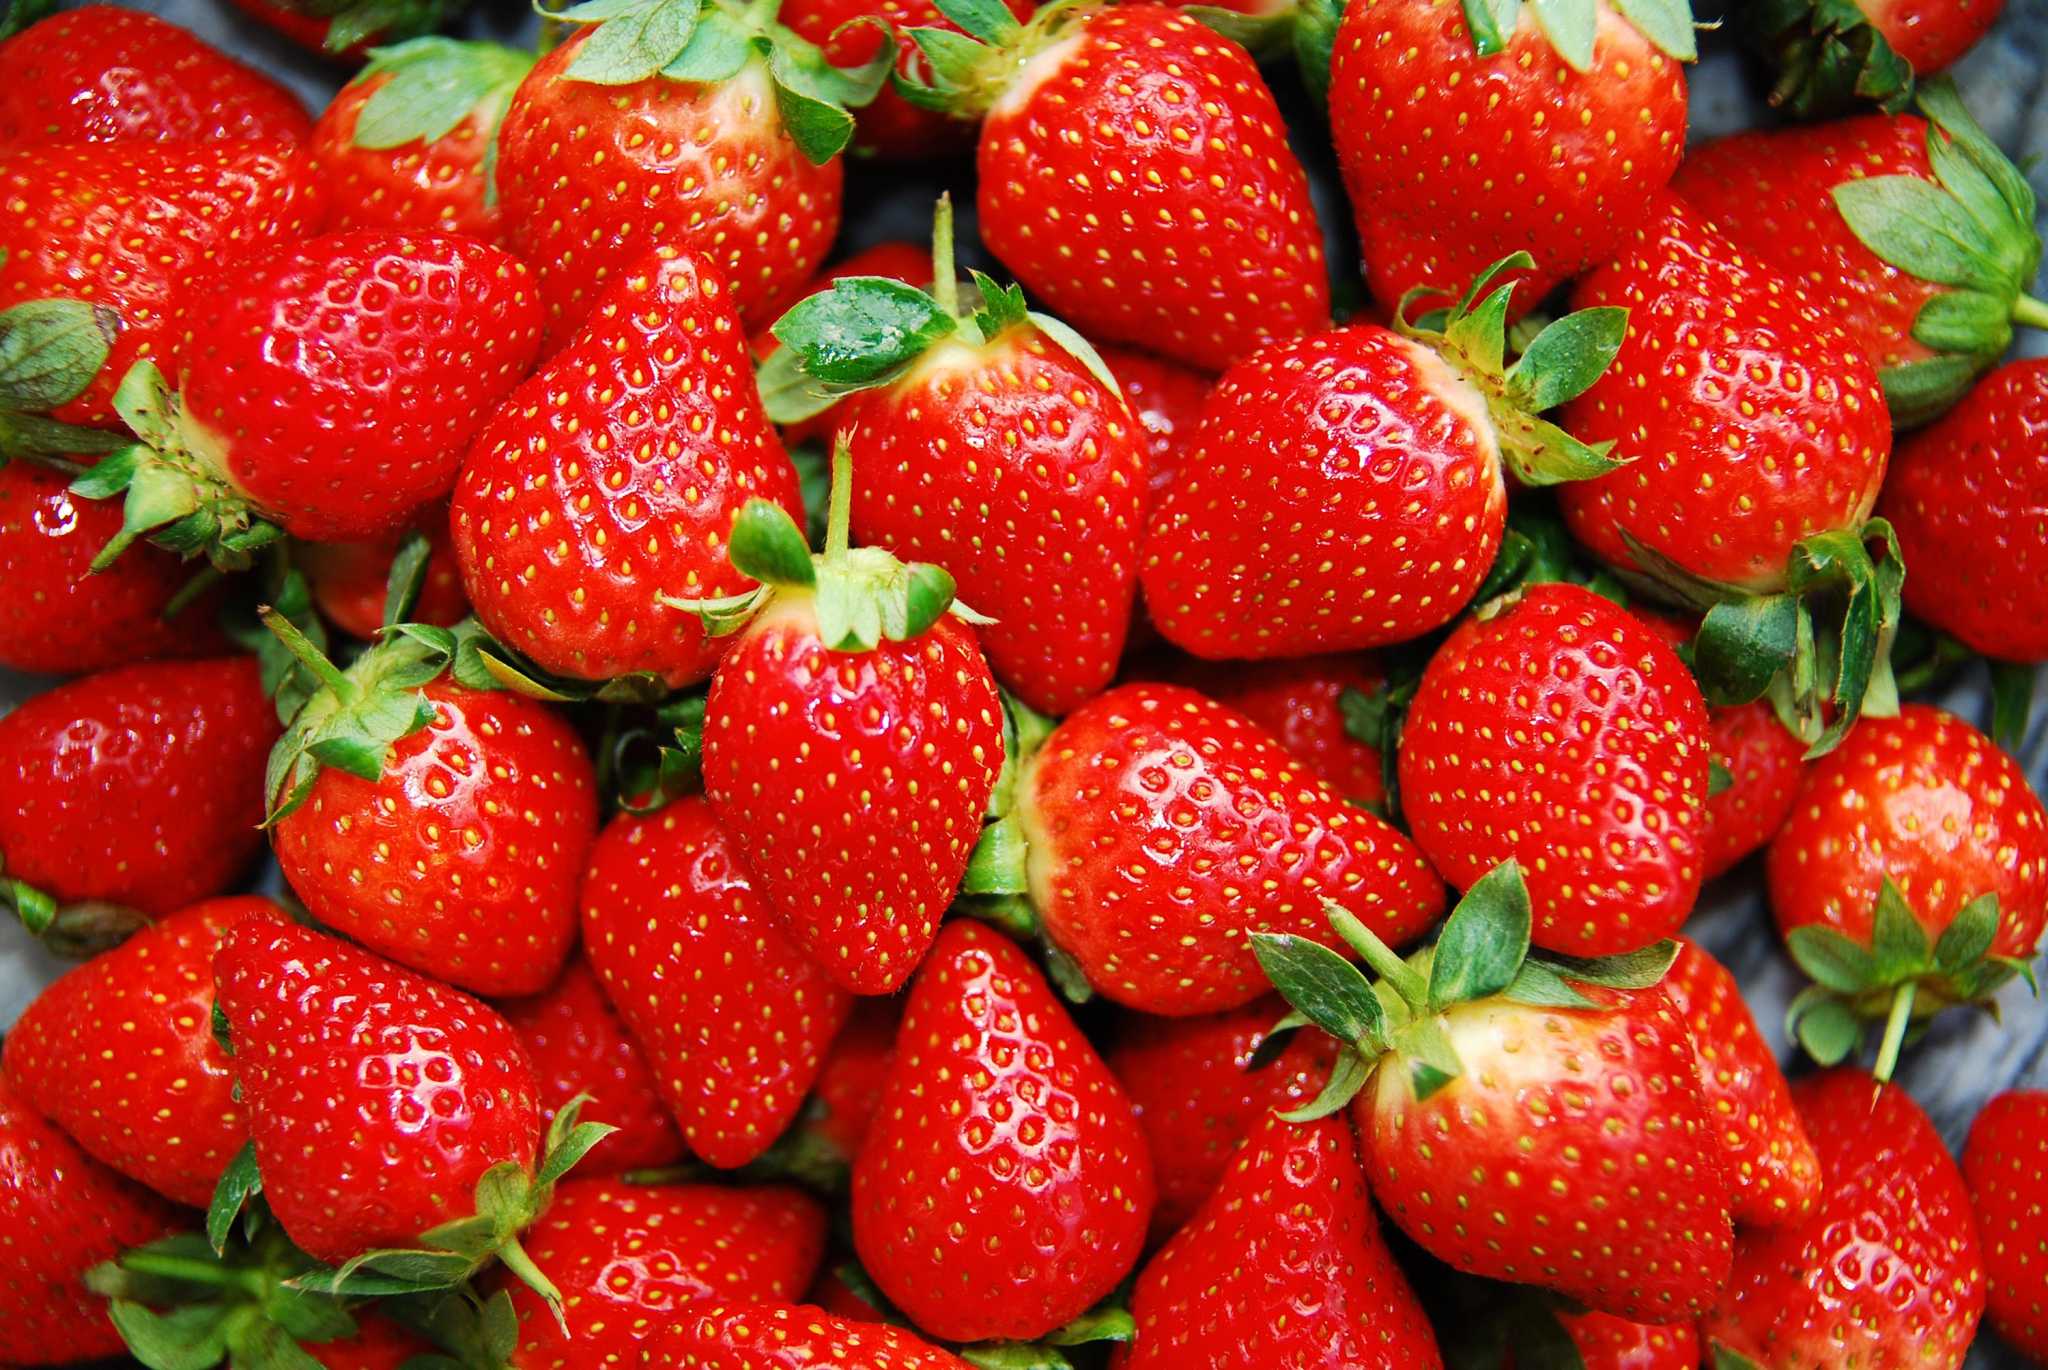 How to keep strawberries fresh for longer, like a week or more